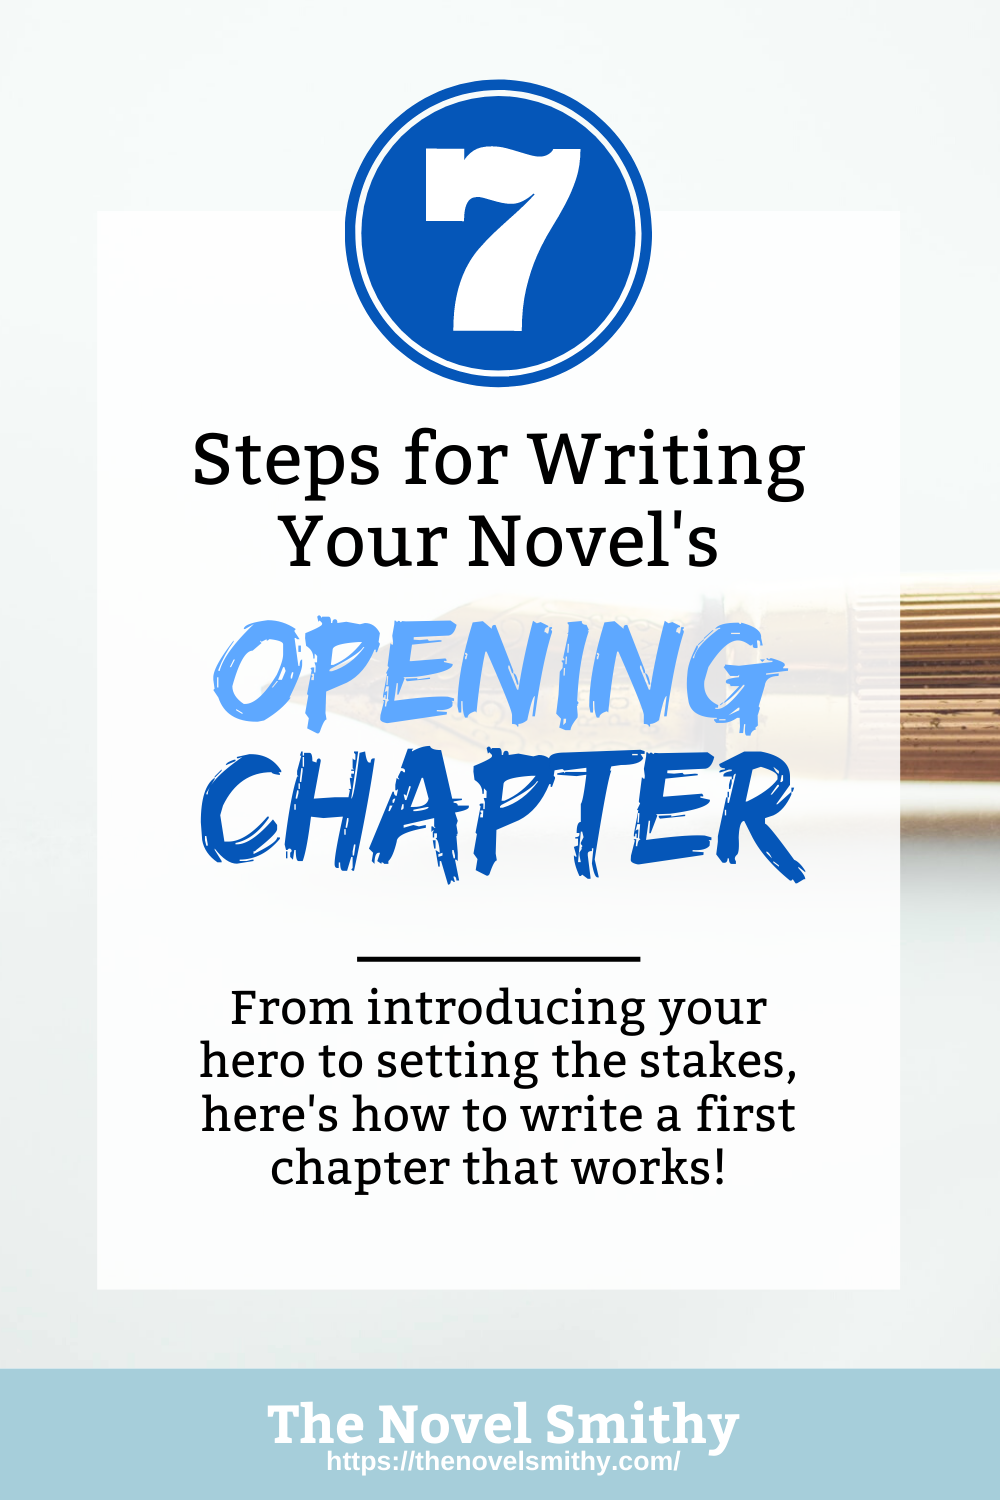 7 Steps for Writing Your Novel’s Opening Chapter